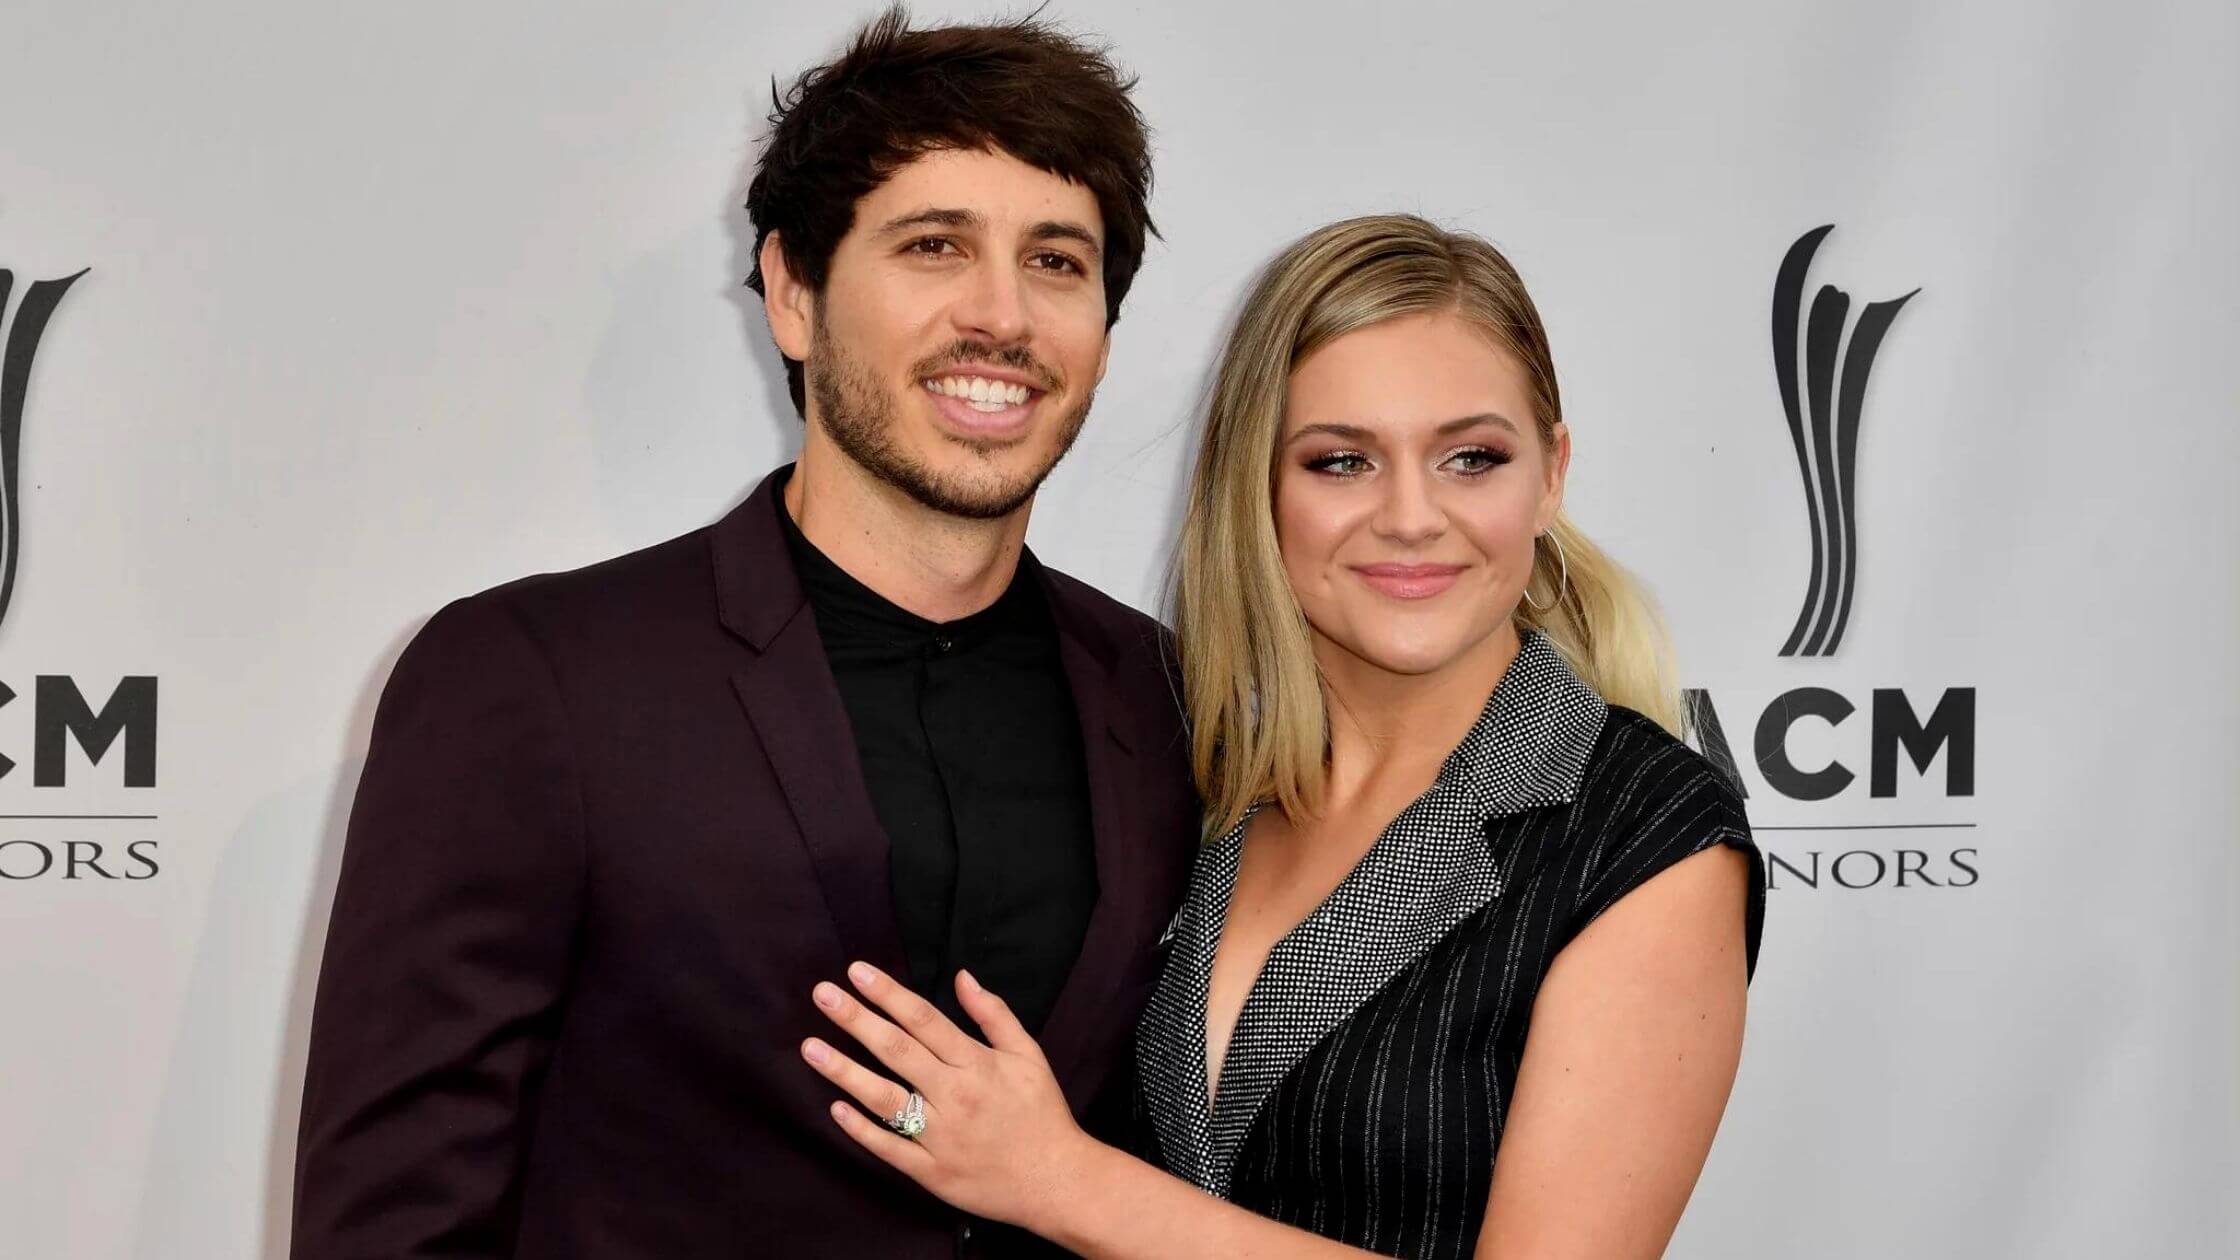 Kelsea Ballerini And Morgan Evans Explain They Don't Write Together